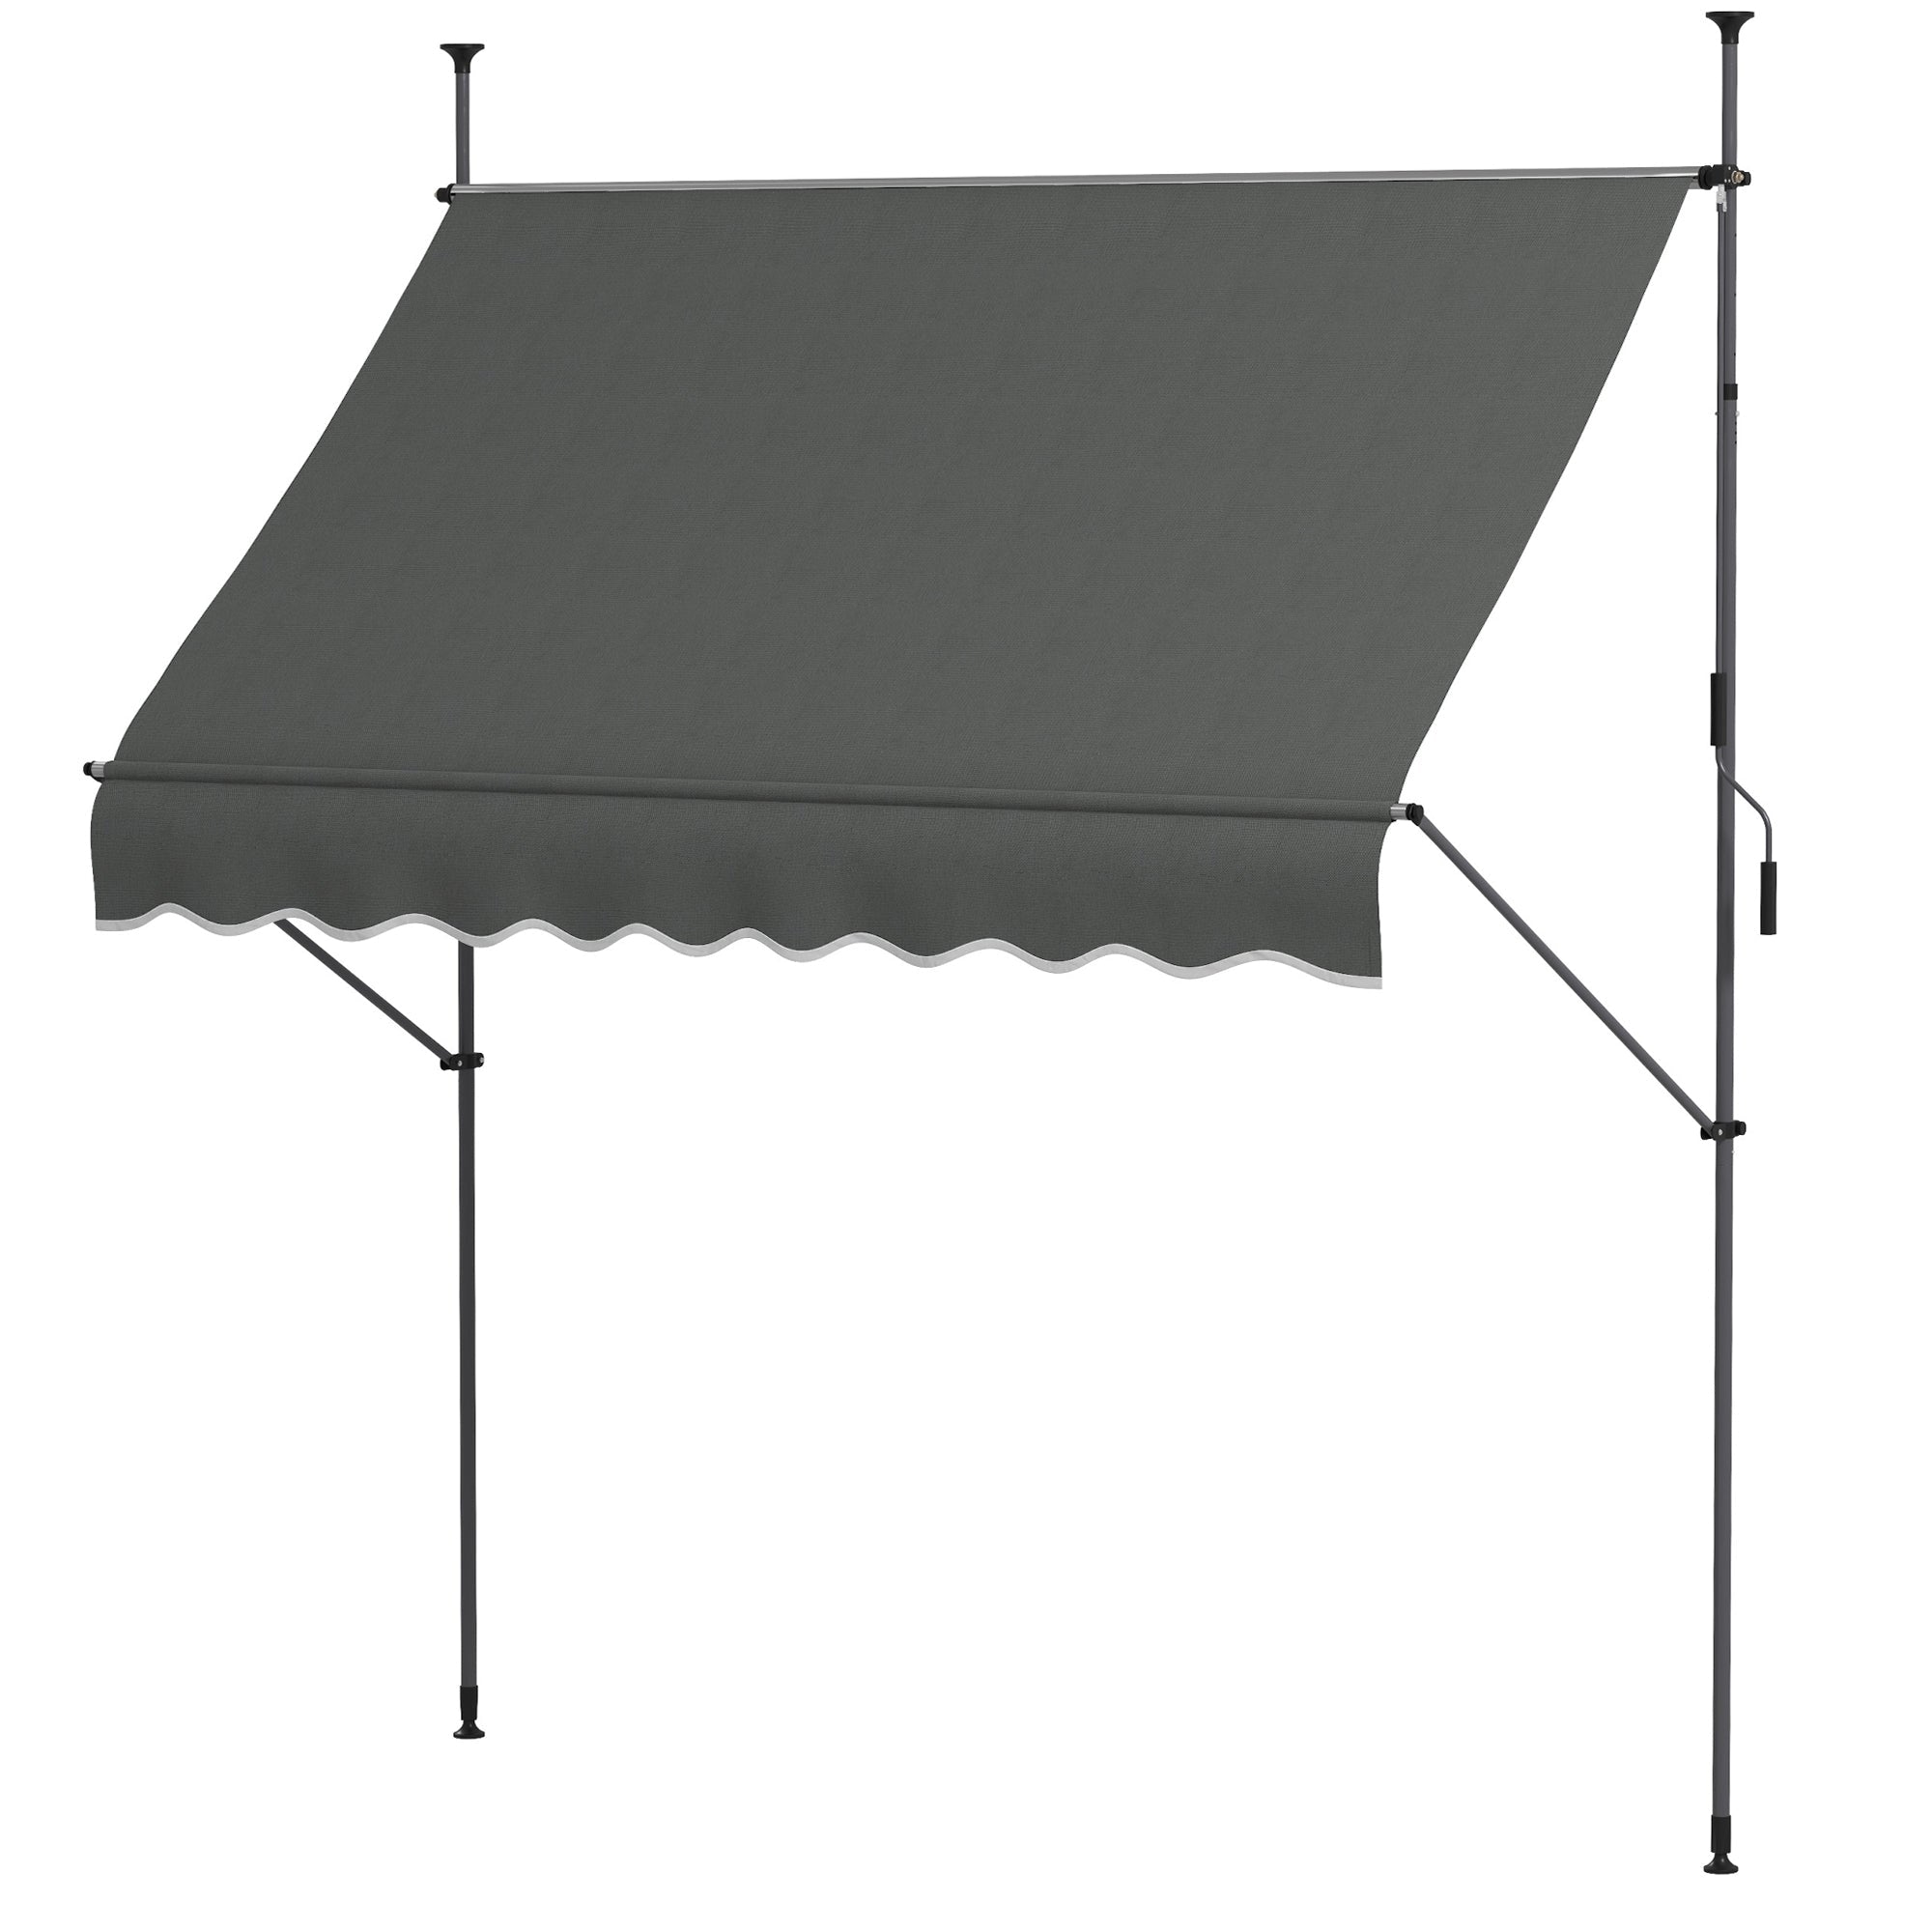 2.5 x 1.2m Retractable Awning, Free Standing Patio Sun Shade Shelter, UV Resistant, for Window and Door, Dark Grey-0